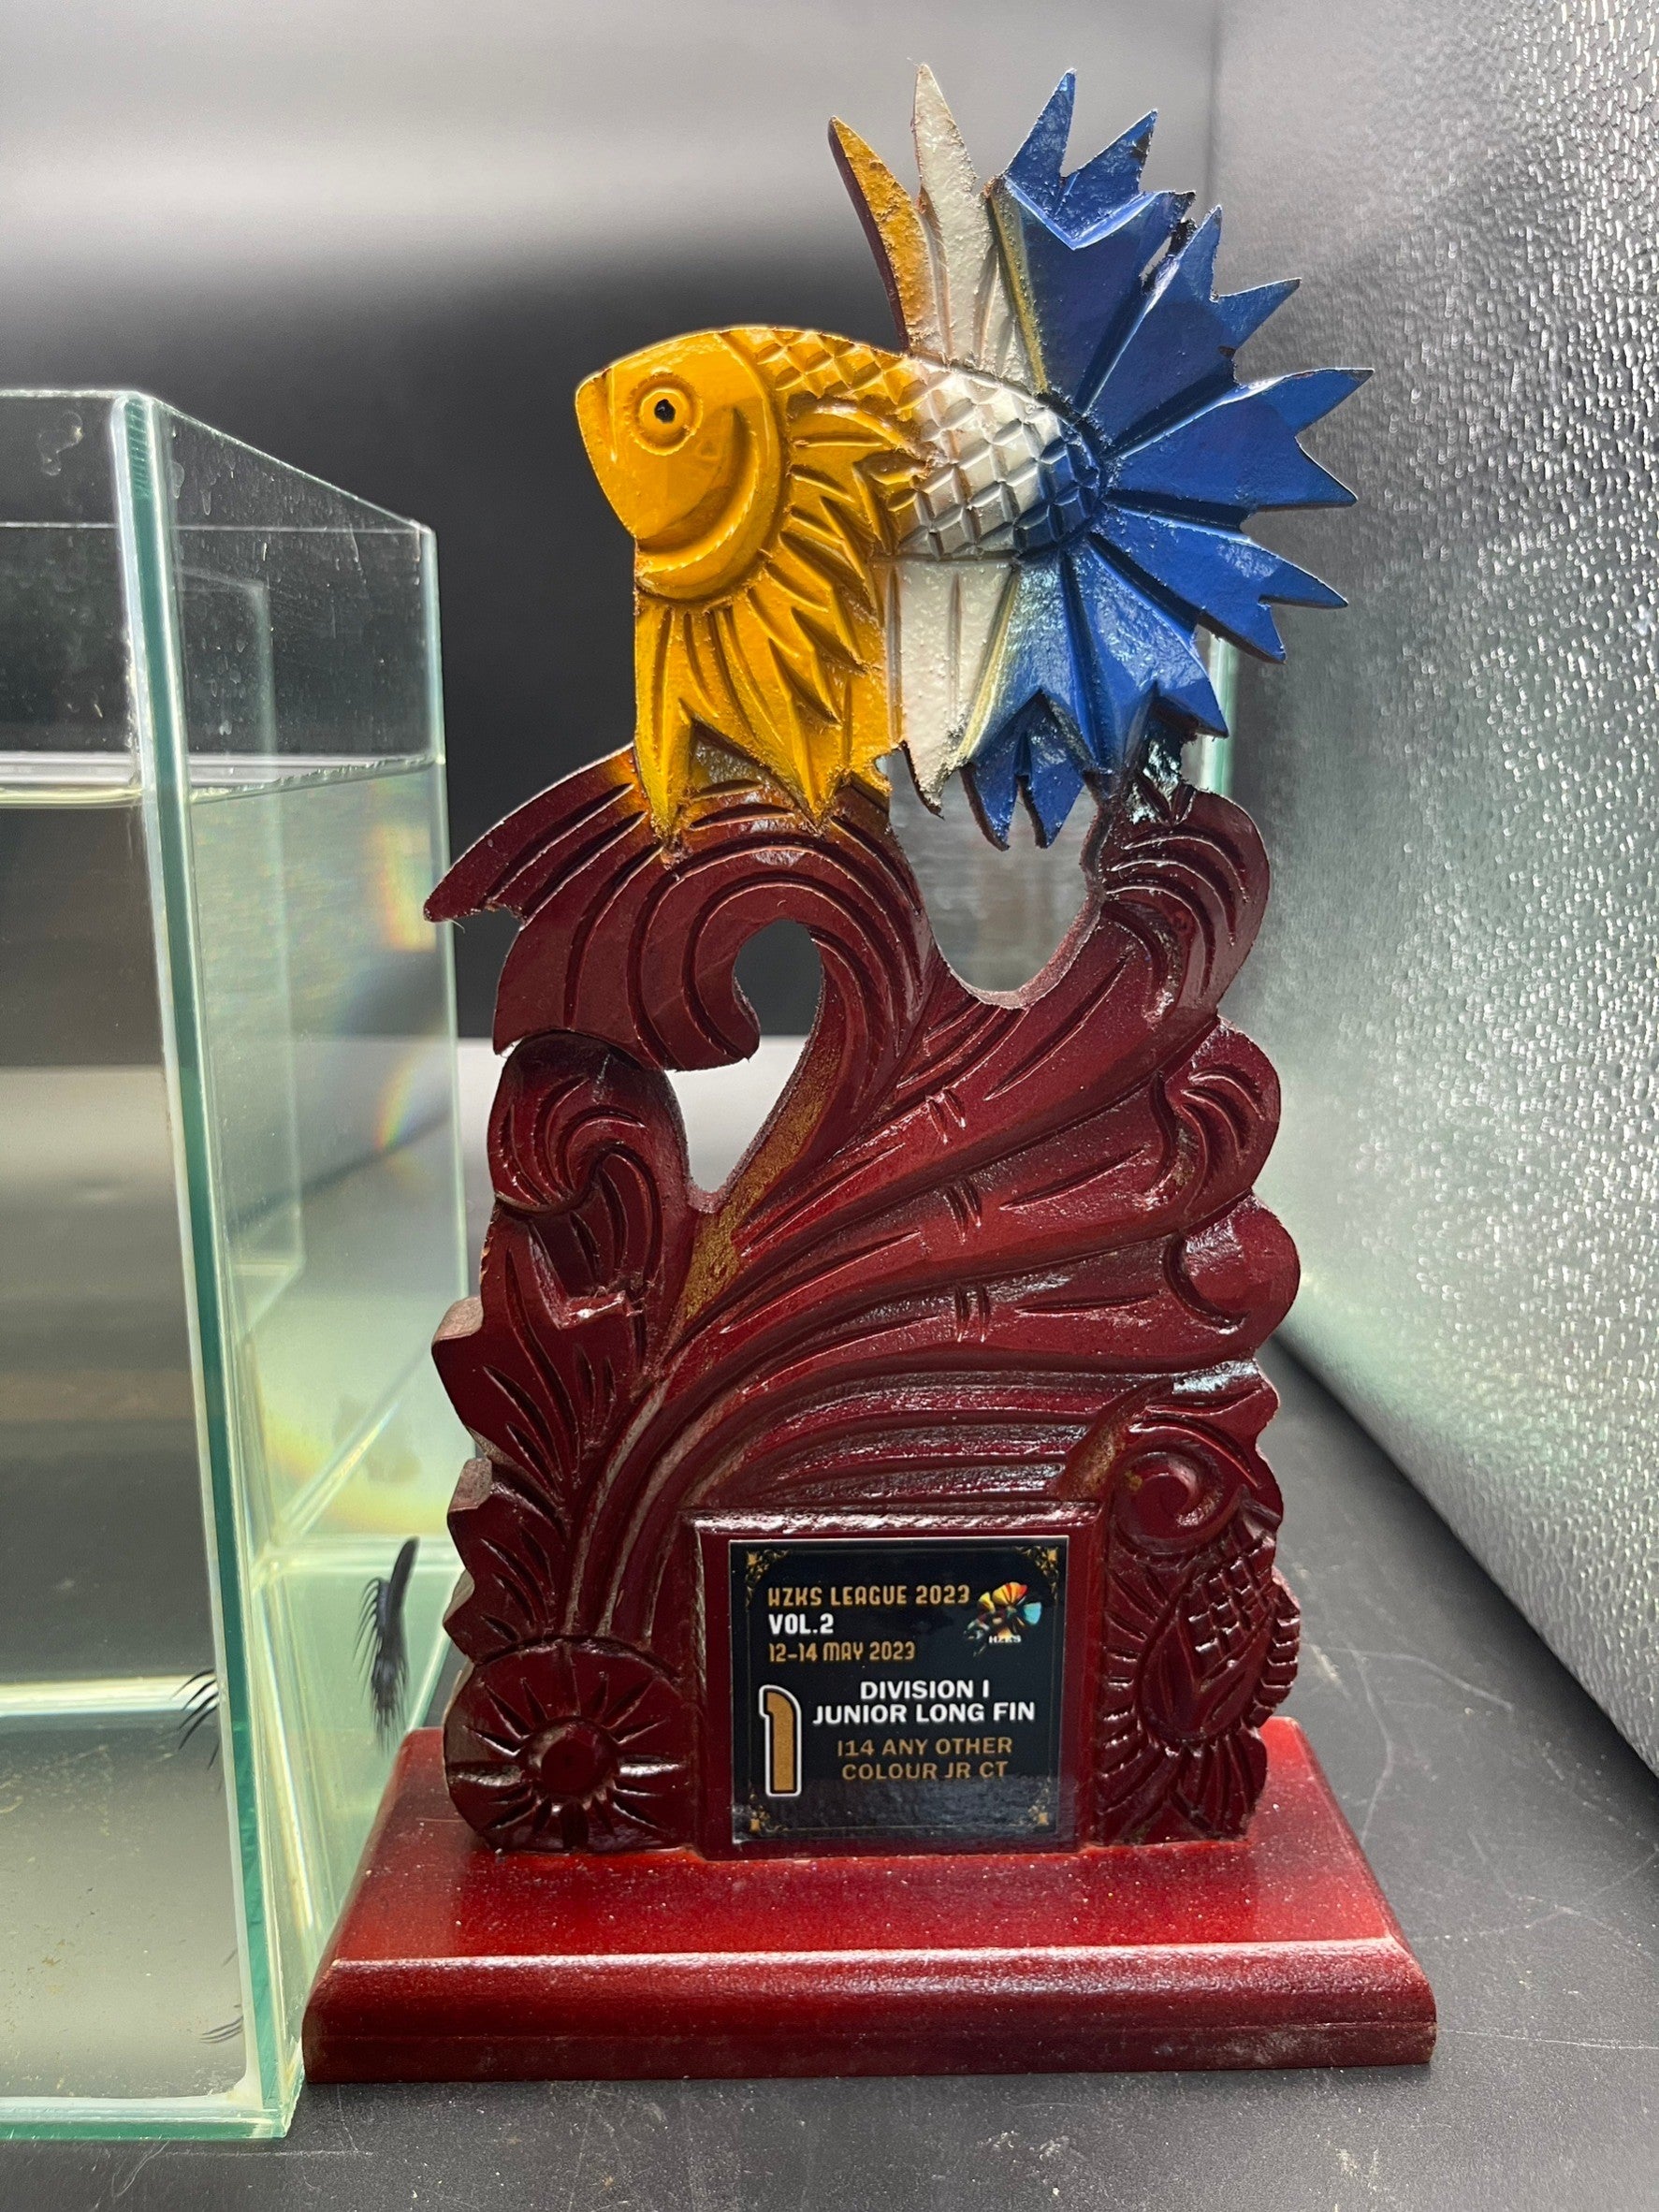 1ST Division I JR. Long Fin Competition - Crowntail Black Venom Betta Fish (MALE)